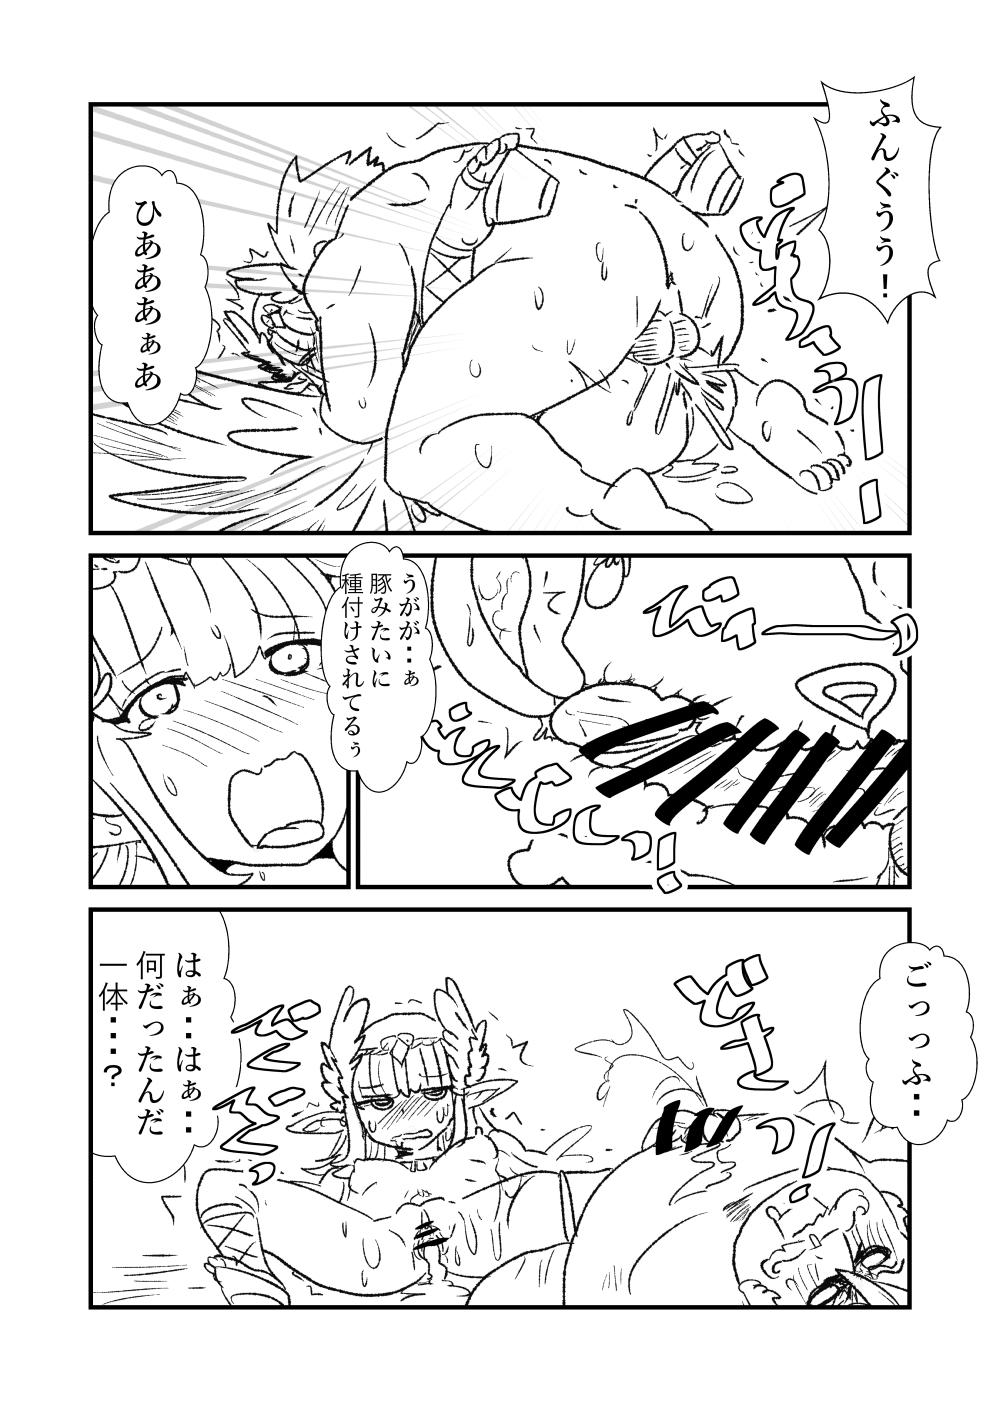 Oralsex FPO~桃色林檎の種付け周回～ - Fate grand order Homo - Page 7